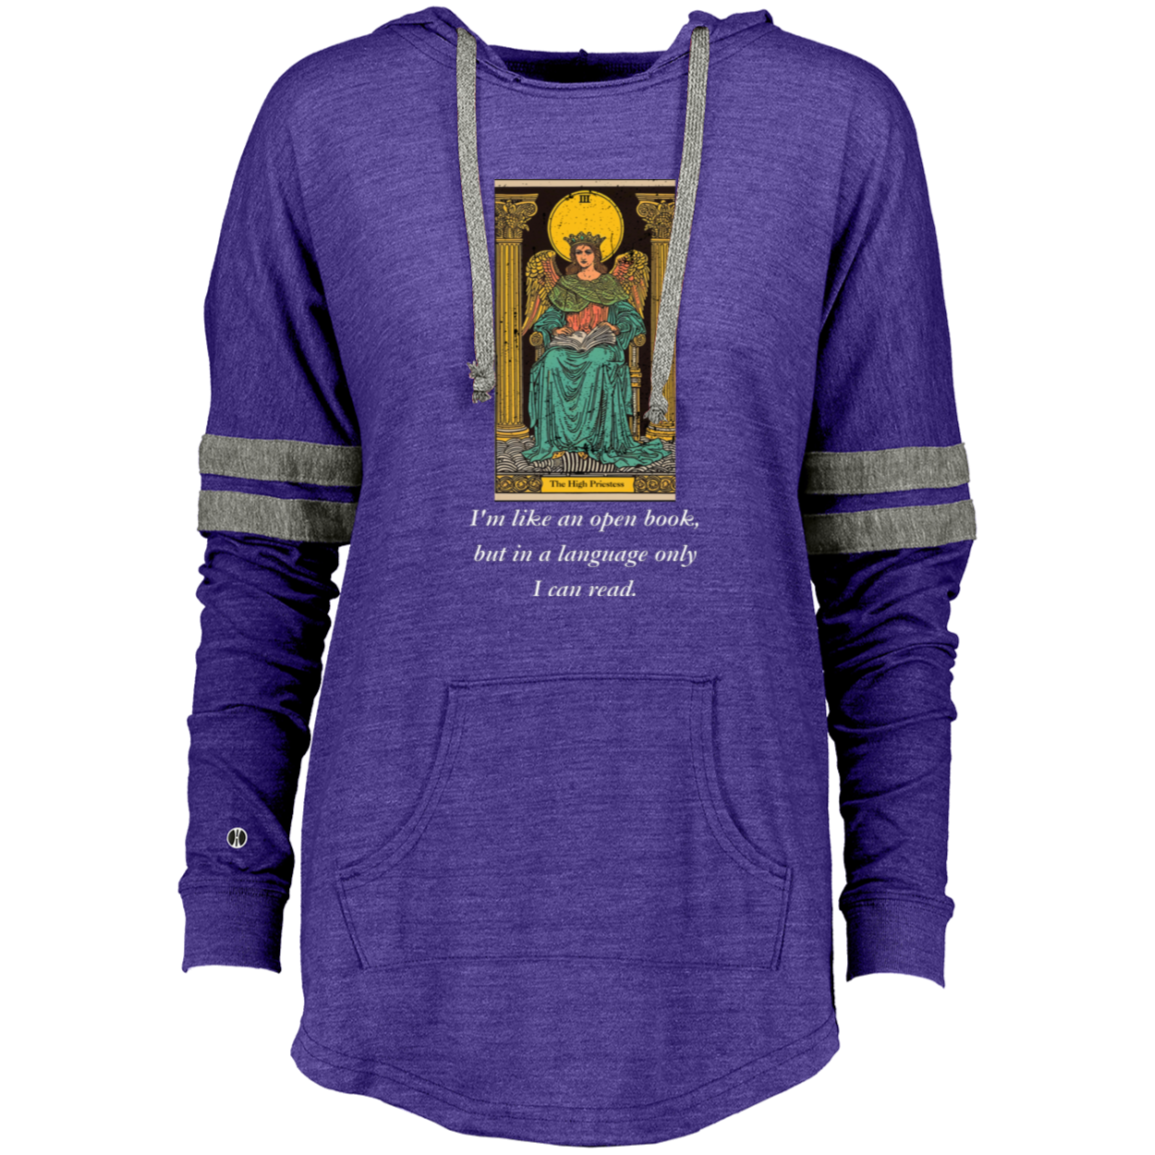 Funny the high priestess women's purple tarot card hoodie pullover from BLK Moon Shop